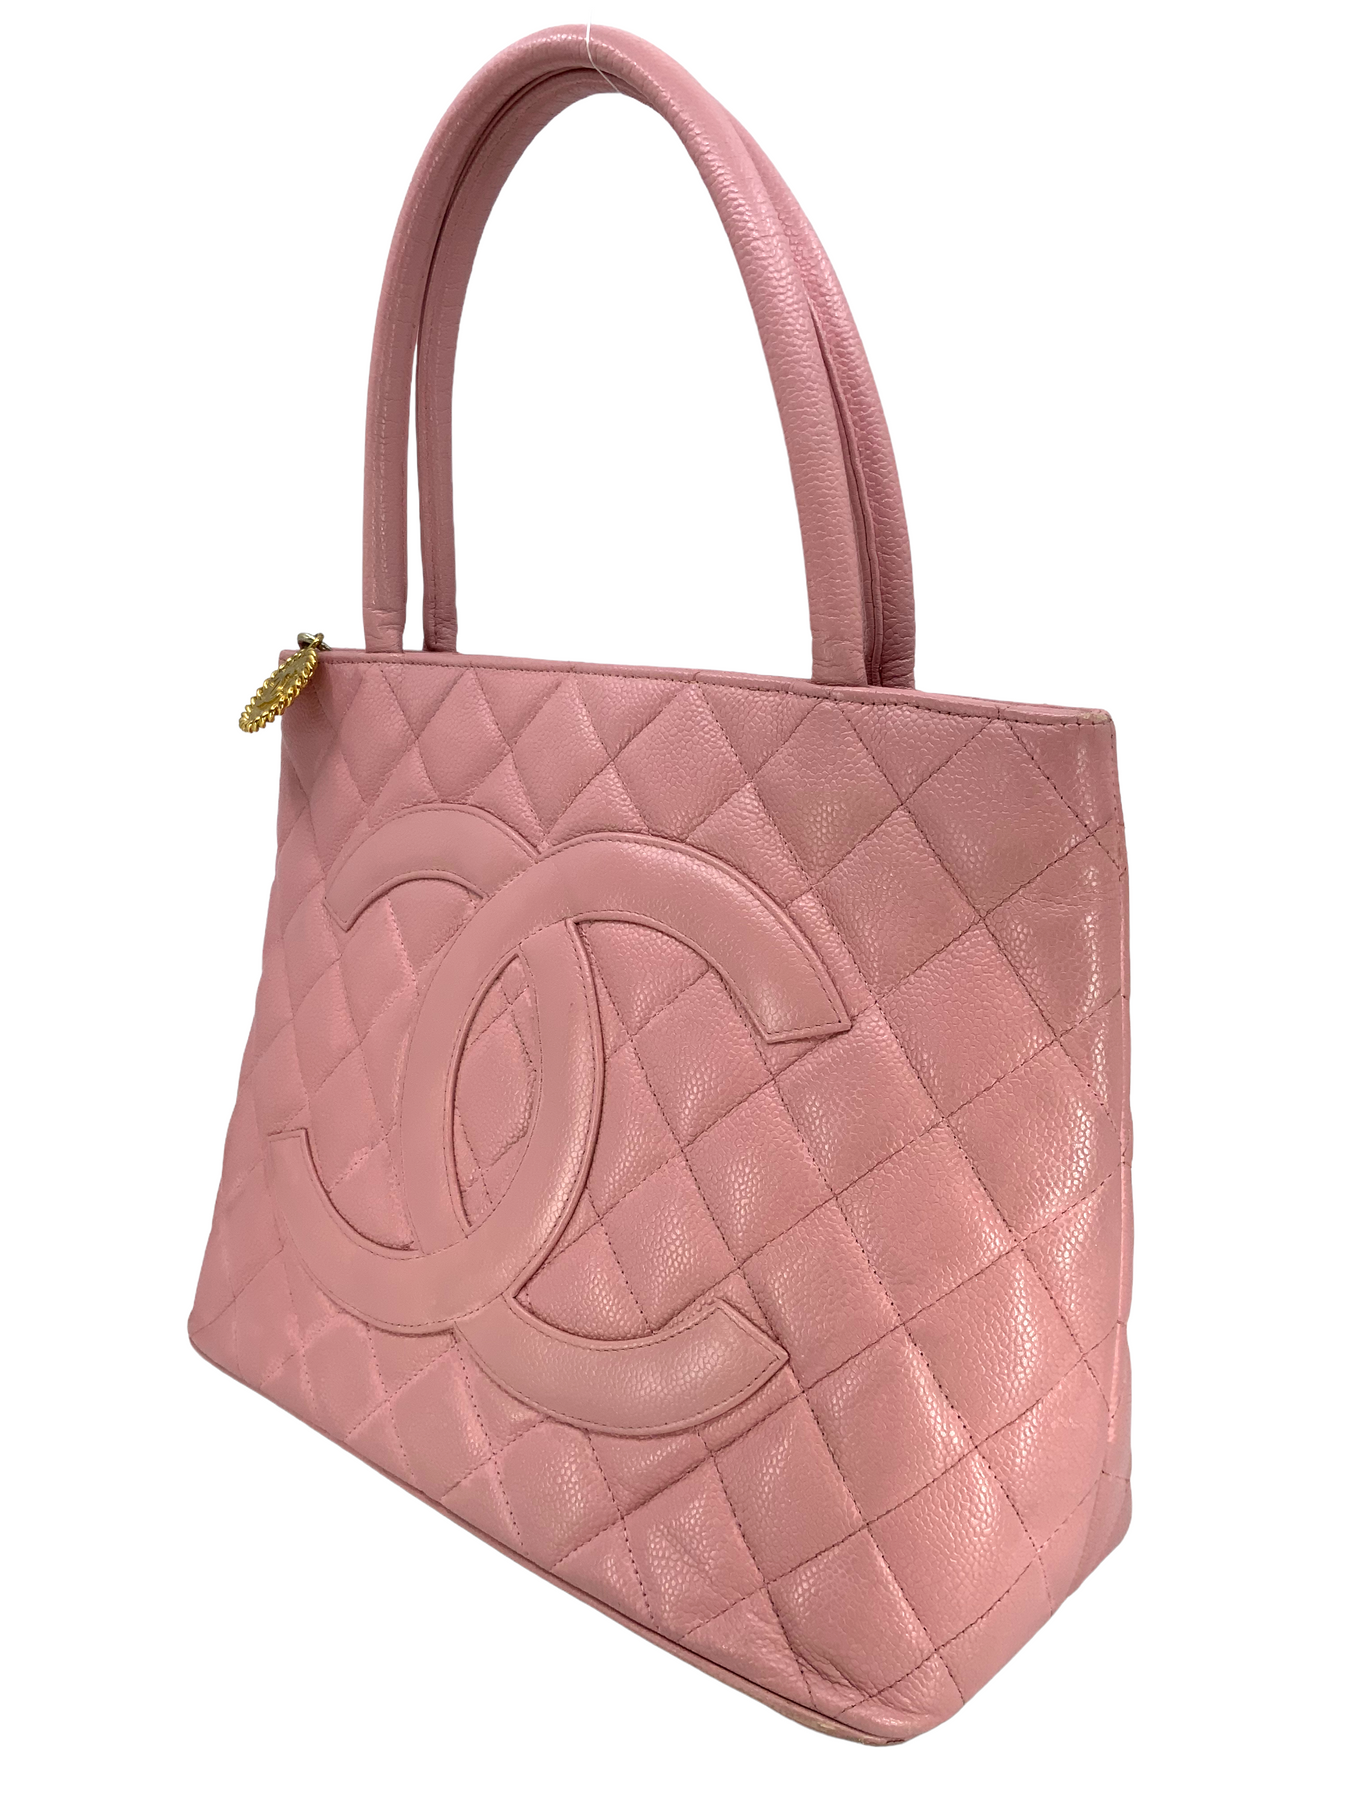 Chanel Caviar Quilted Medallion Tote Ivory